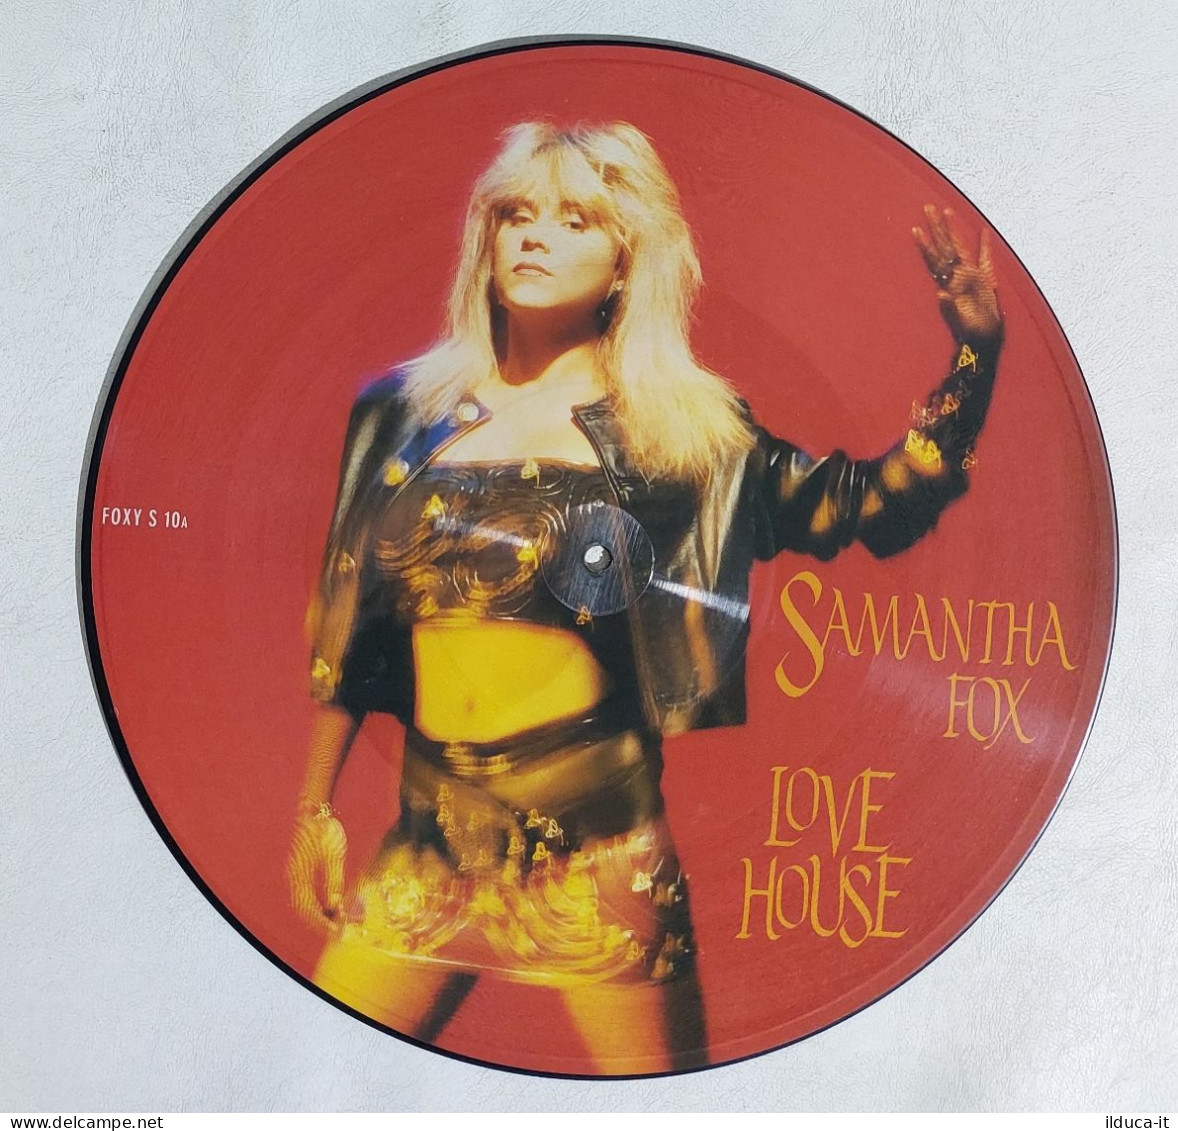 I114381 LP 33 Giri Picture Disc - Samantha Fox - Love House - Zomba 1988 - Editions Limitées